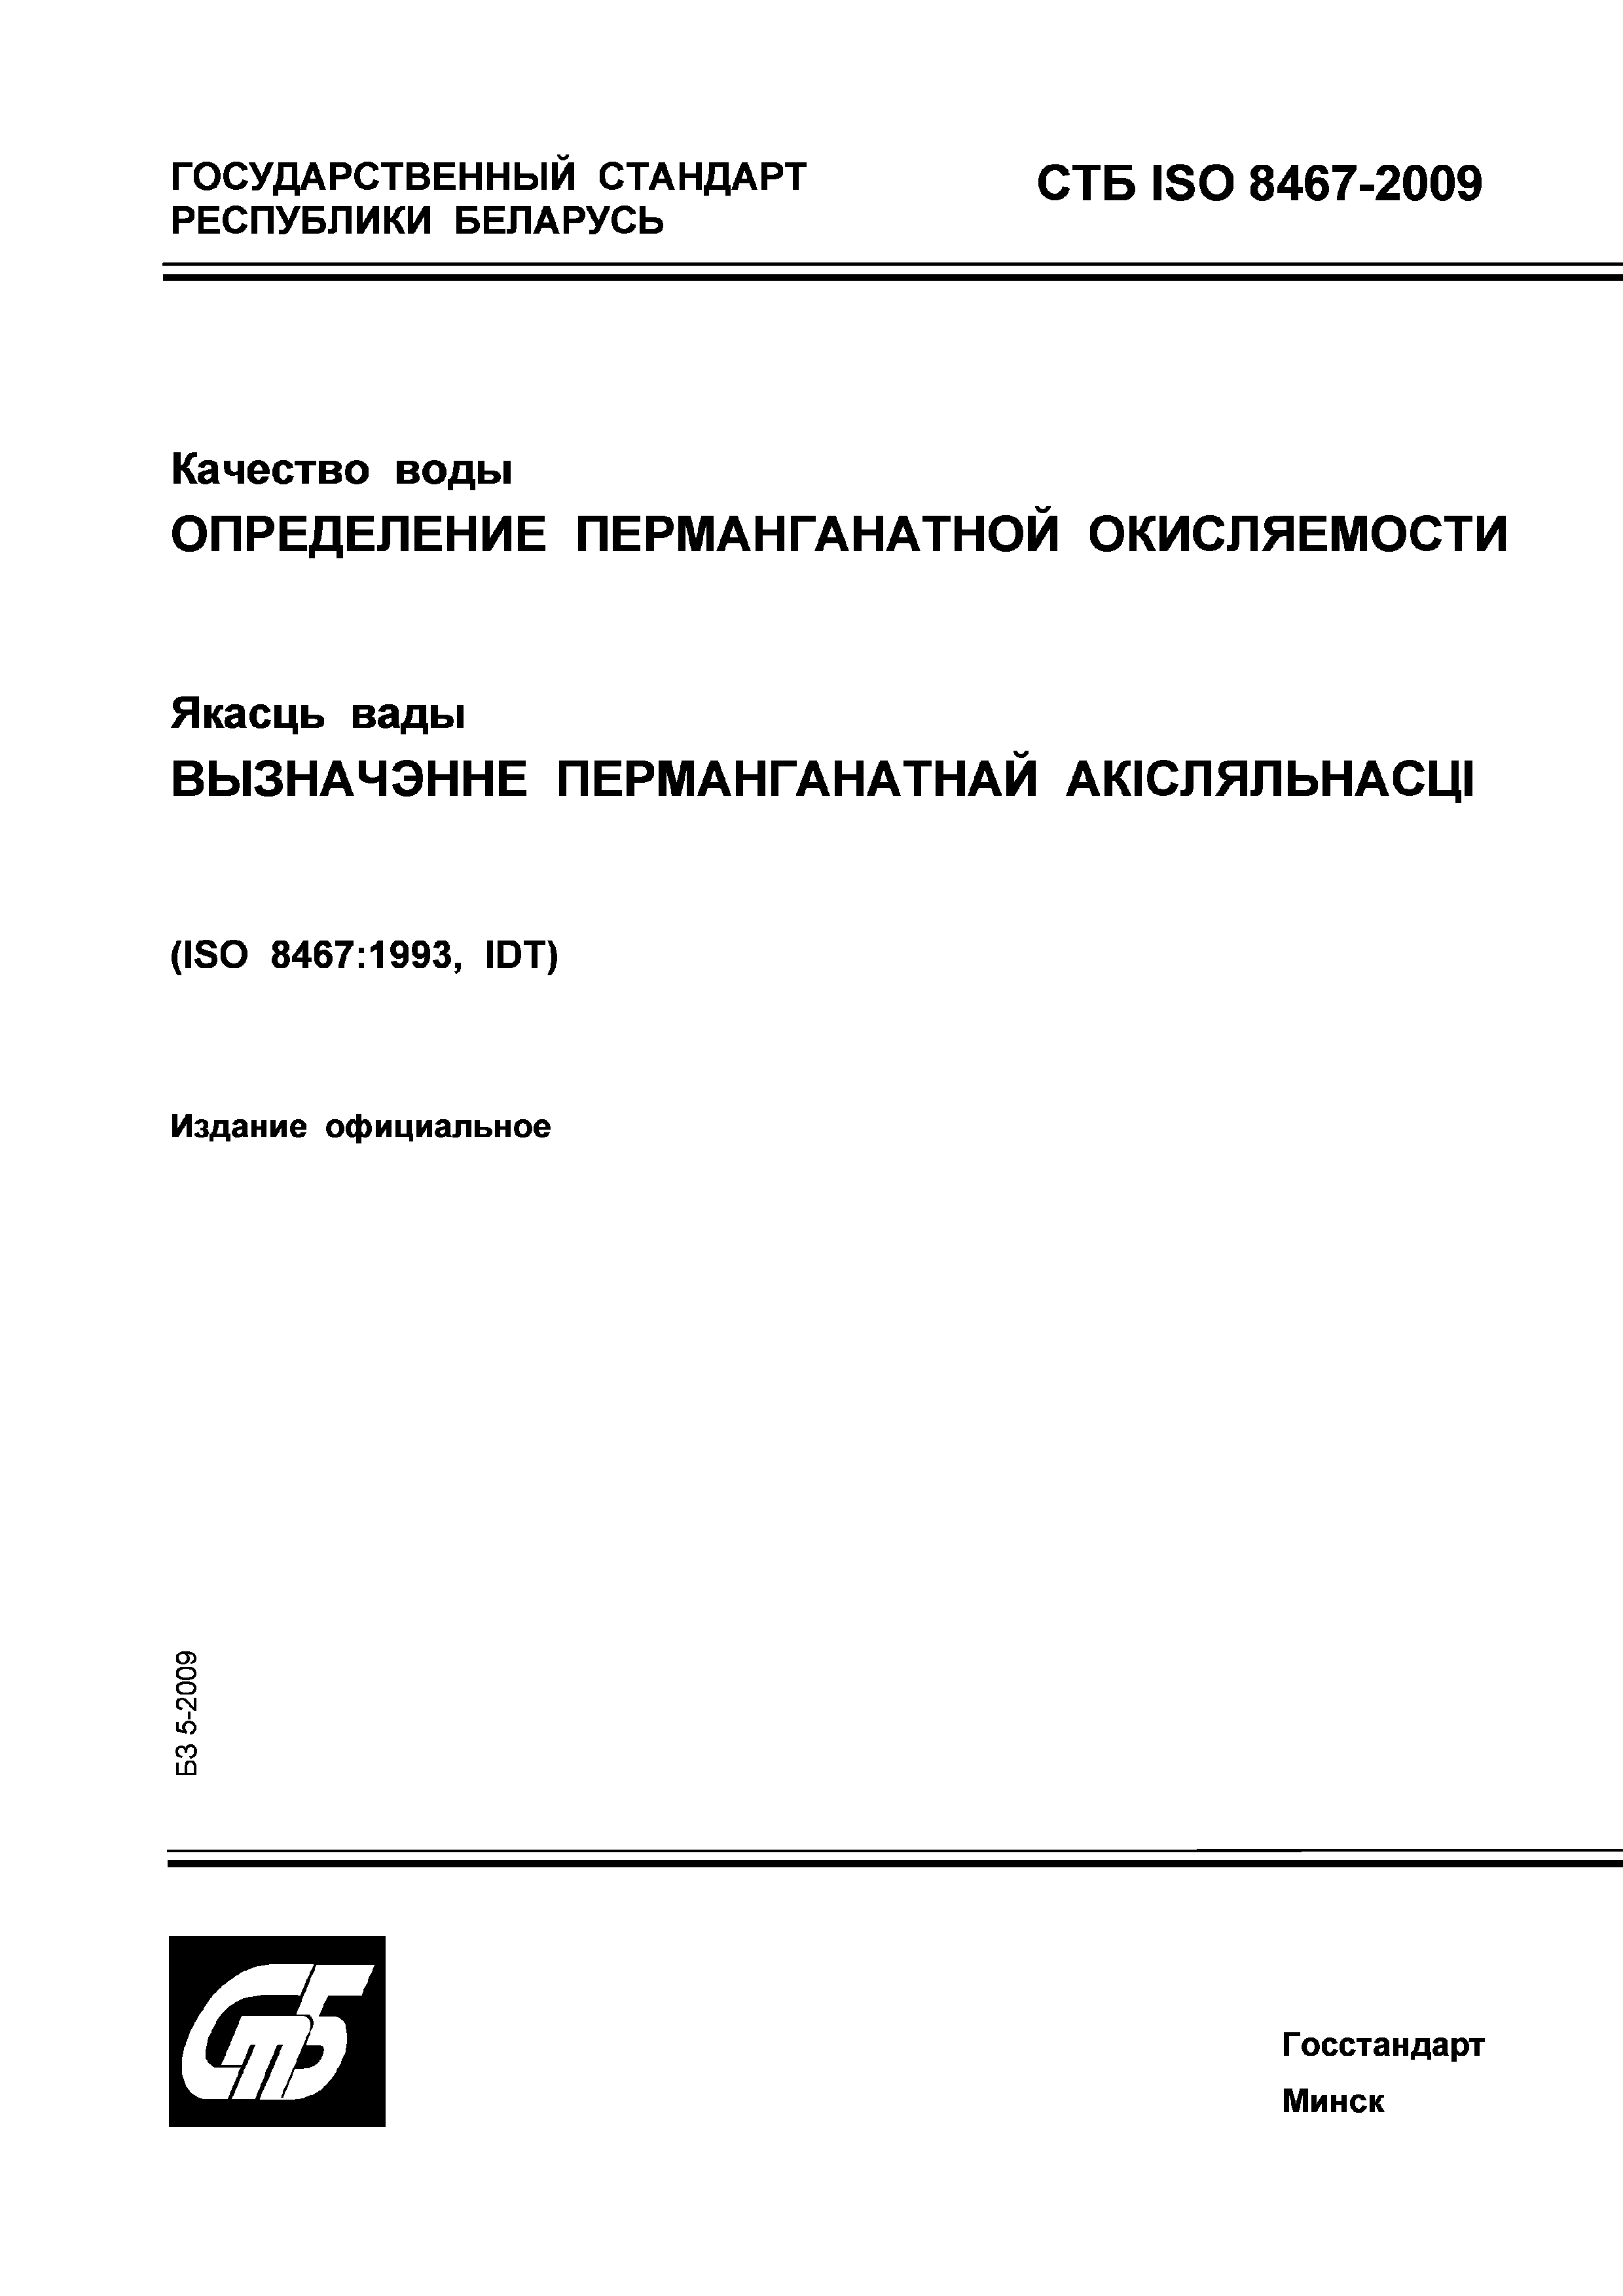 СТБ ISO 8467-2009